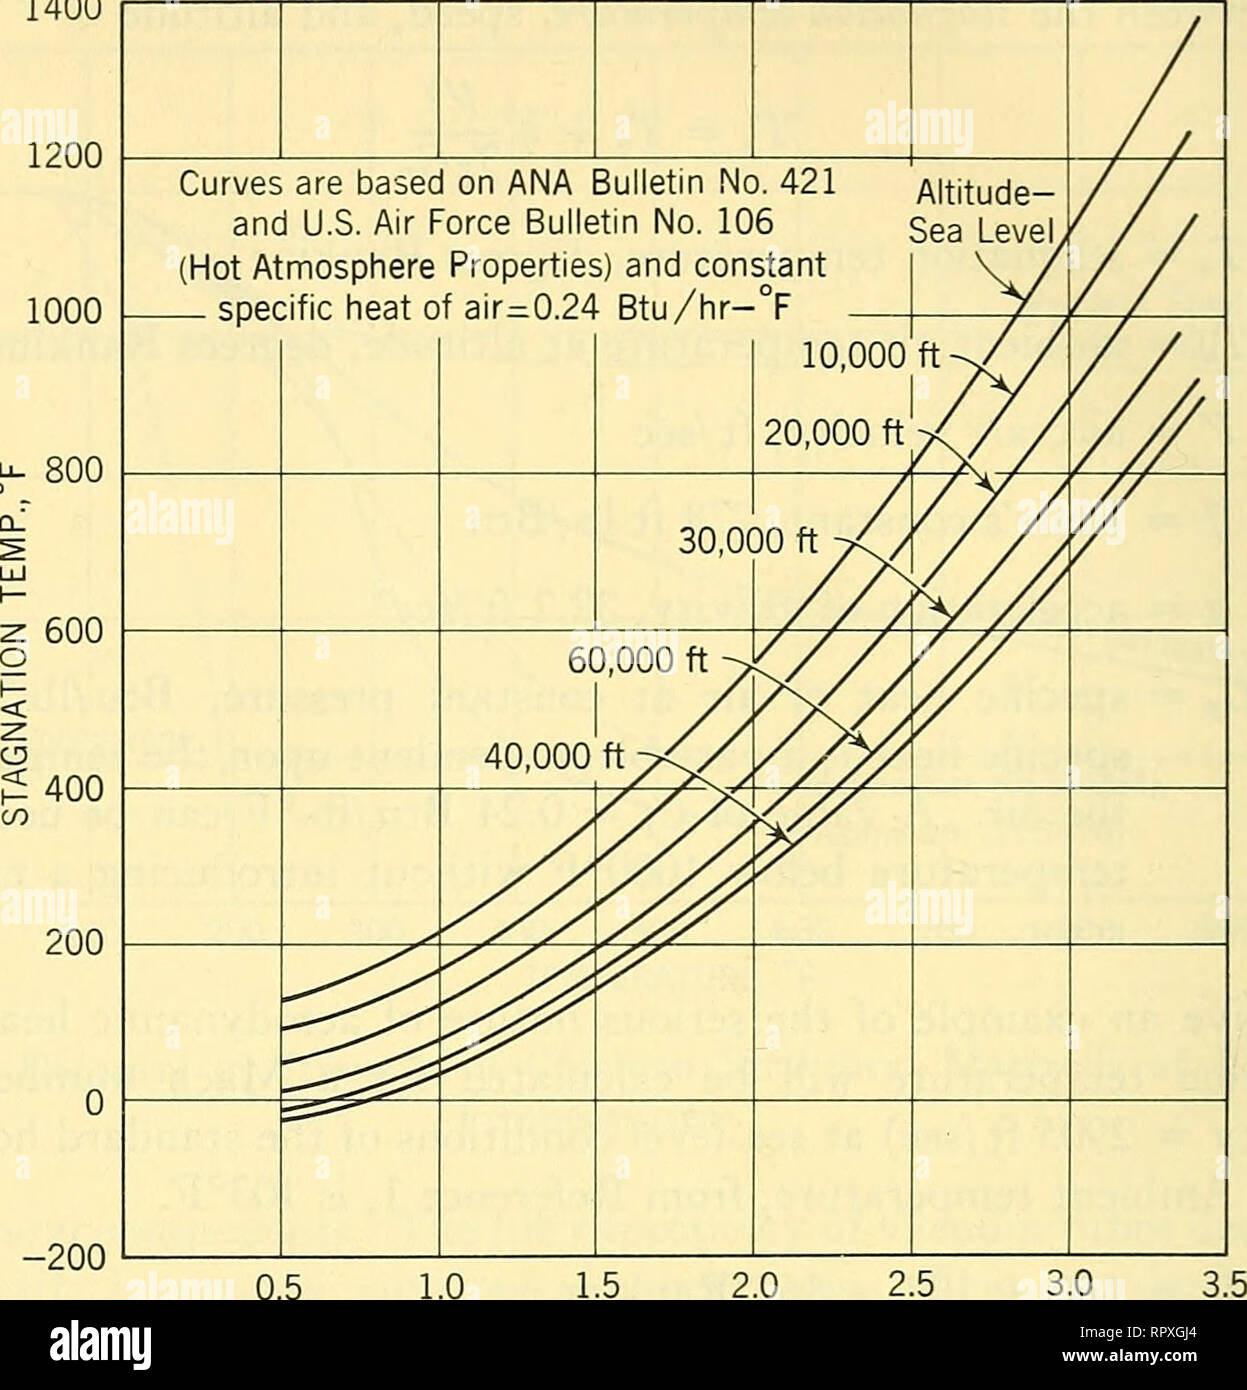 . Airborne radar. Airplanes; Guided missiles. 686 MECHANICAL DESIGN AND PACKAGING 1400. 1.0 1.5 2.0 MACH NUMBER Fig. 13-2 Stagnacion Air Temperature vs. Flight Speed and Altitude. earth's surface. Since, however, the factor of transmissivity of solar radiation through the earth's atmosphere is a variable, it is feasible and conservative to consider the maximum solar radiation constant of 429 Btu/ft^/hour to obtain for all design conditions, ground operations as well as flight conditions. Therefore, the actual rate of heat transfer to the aircraft or body skin by solar radiation (resulting in a Stock Photo